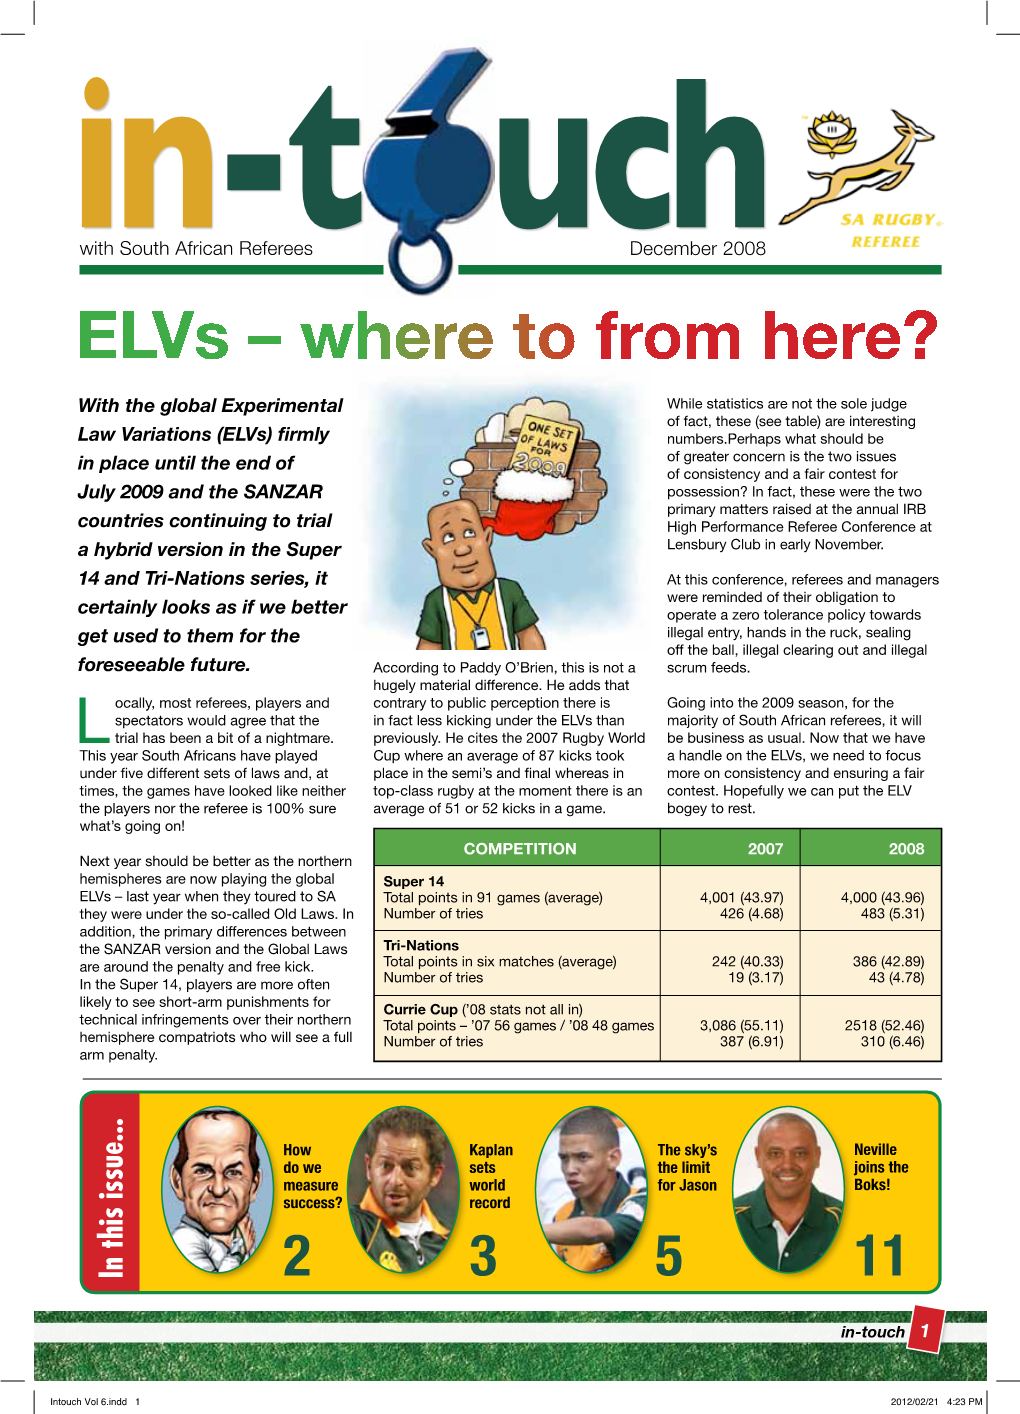 Elvs – Where to from Here?